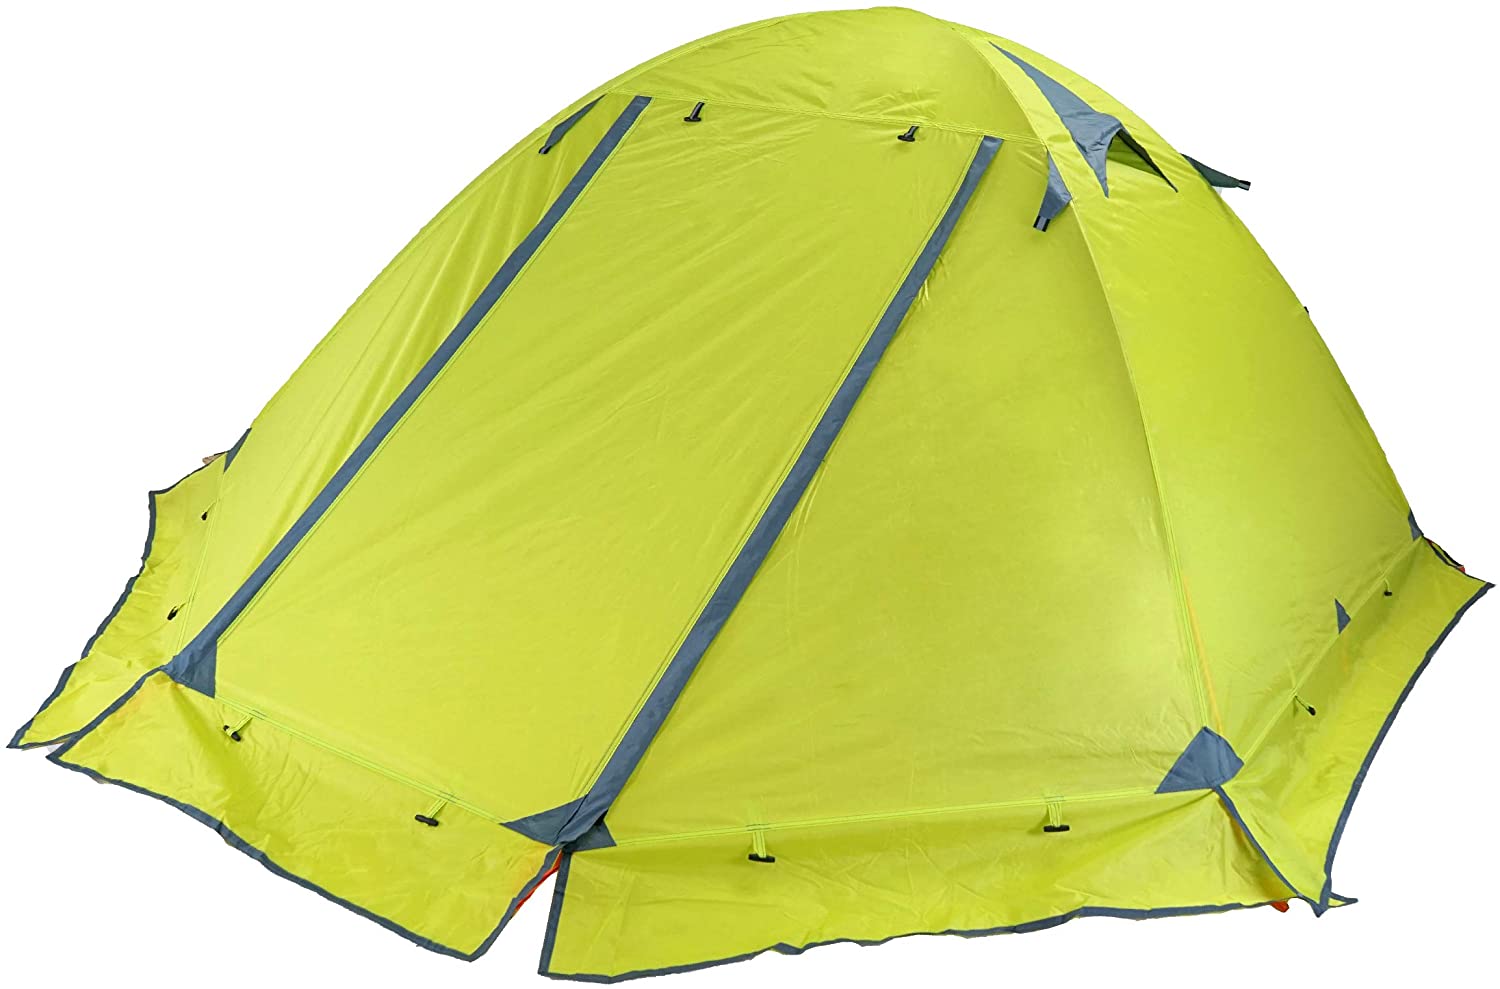 Waterproof Windproof Ultralight for Backpacking Camping